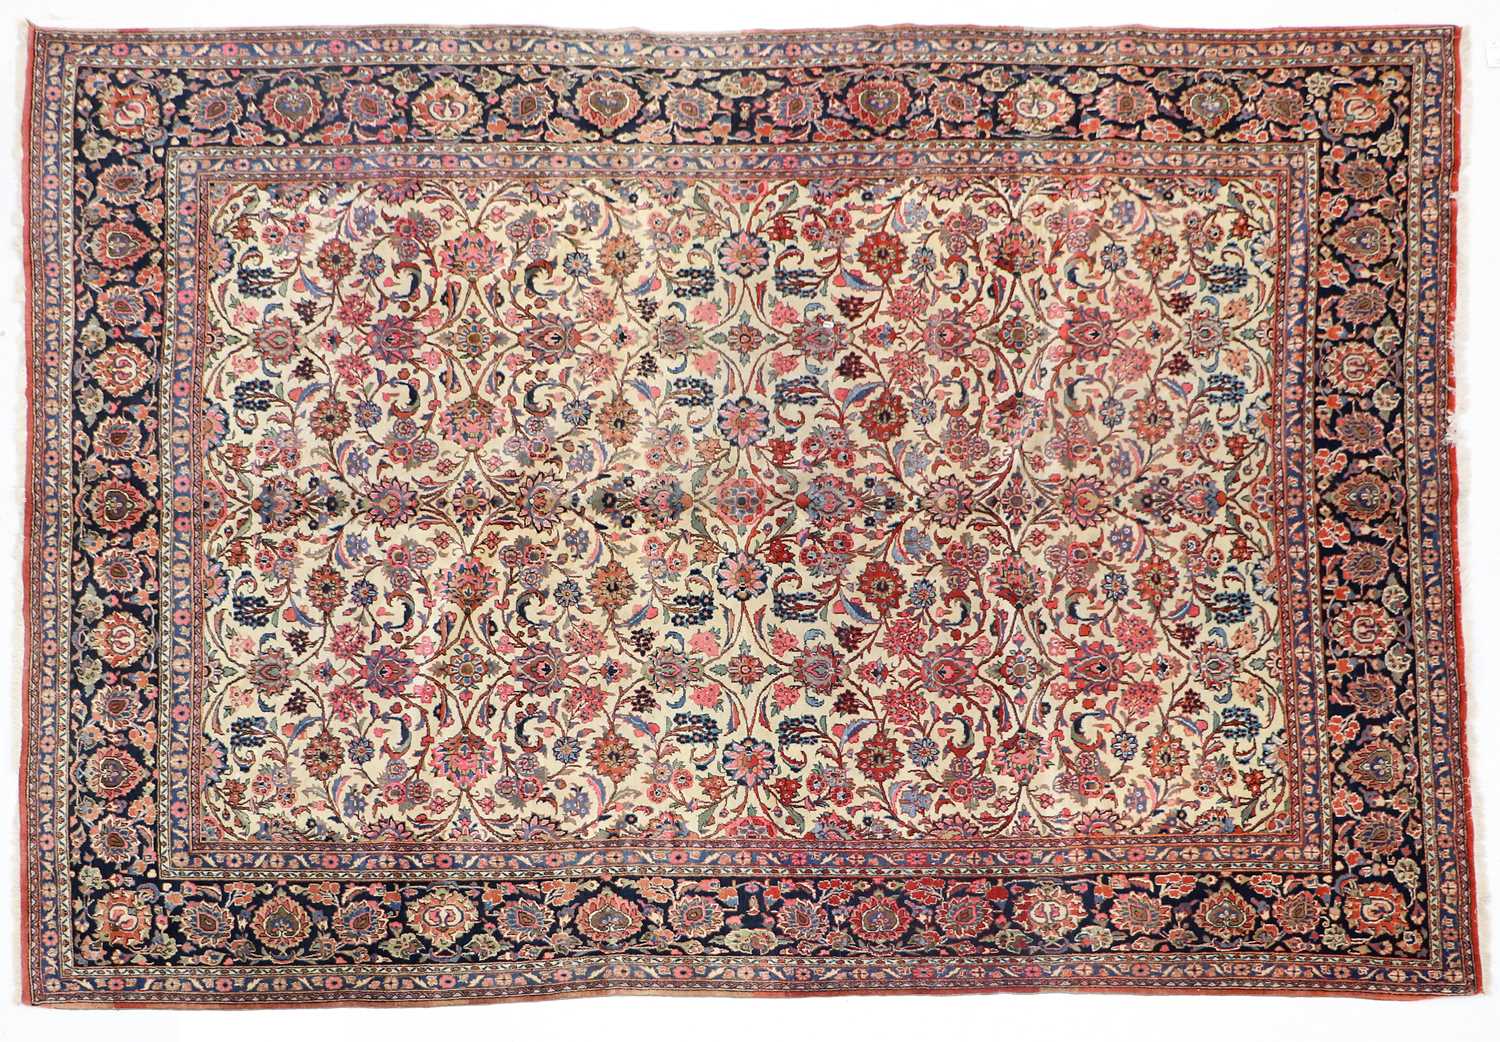 Kashan Carpet Central Iran, circa 1970 The ivory field with an allover design of vines and palmettes